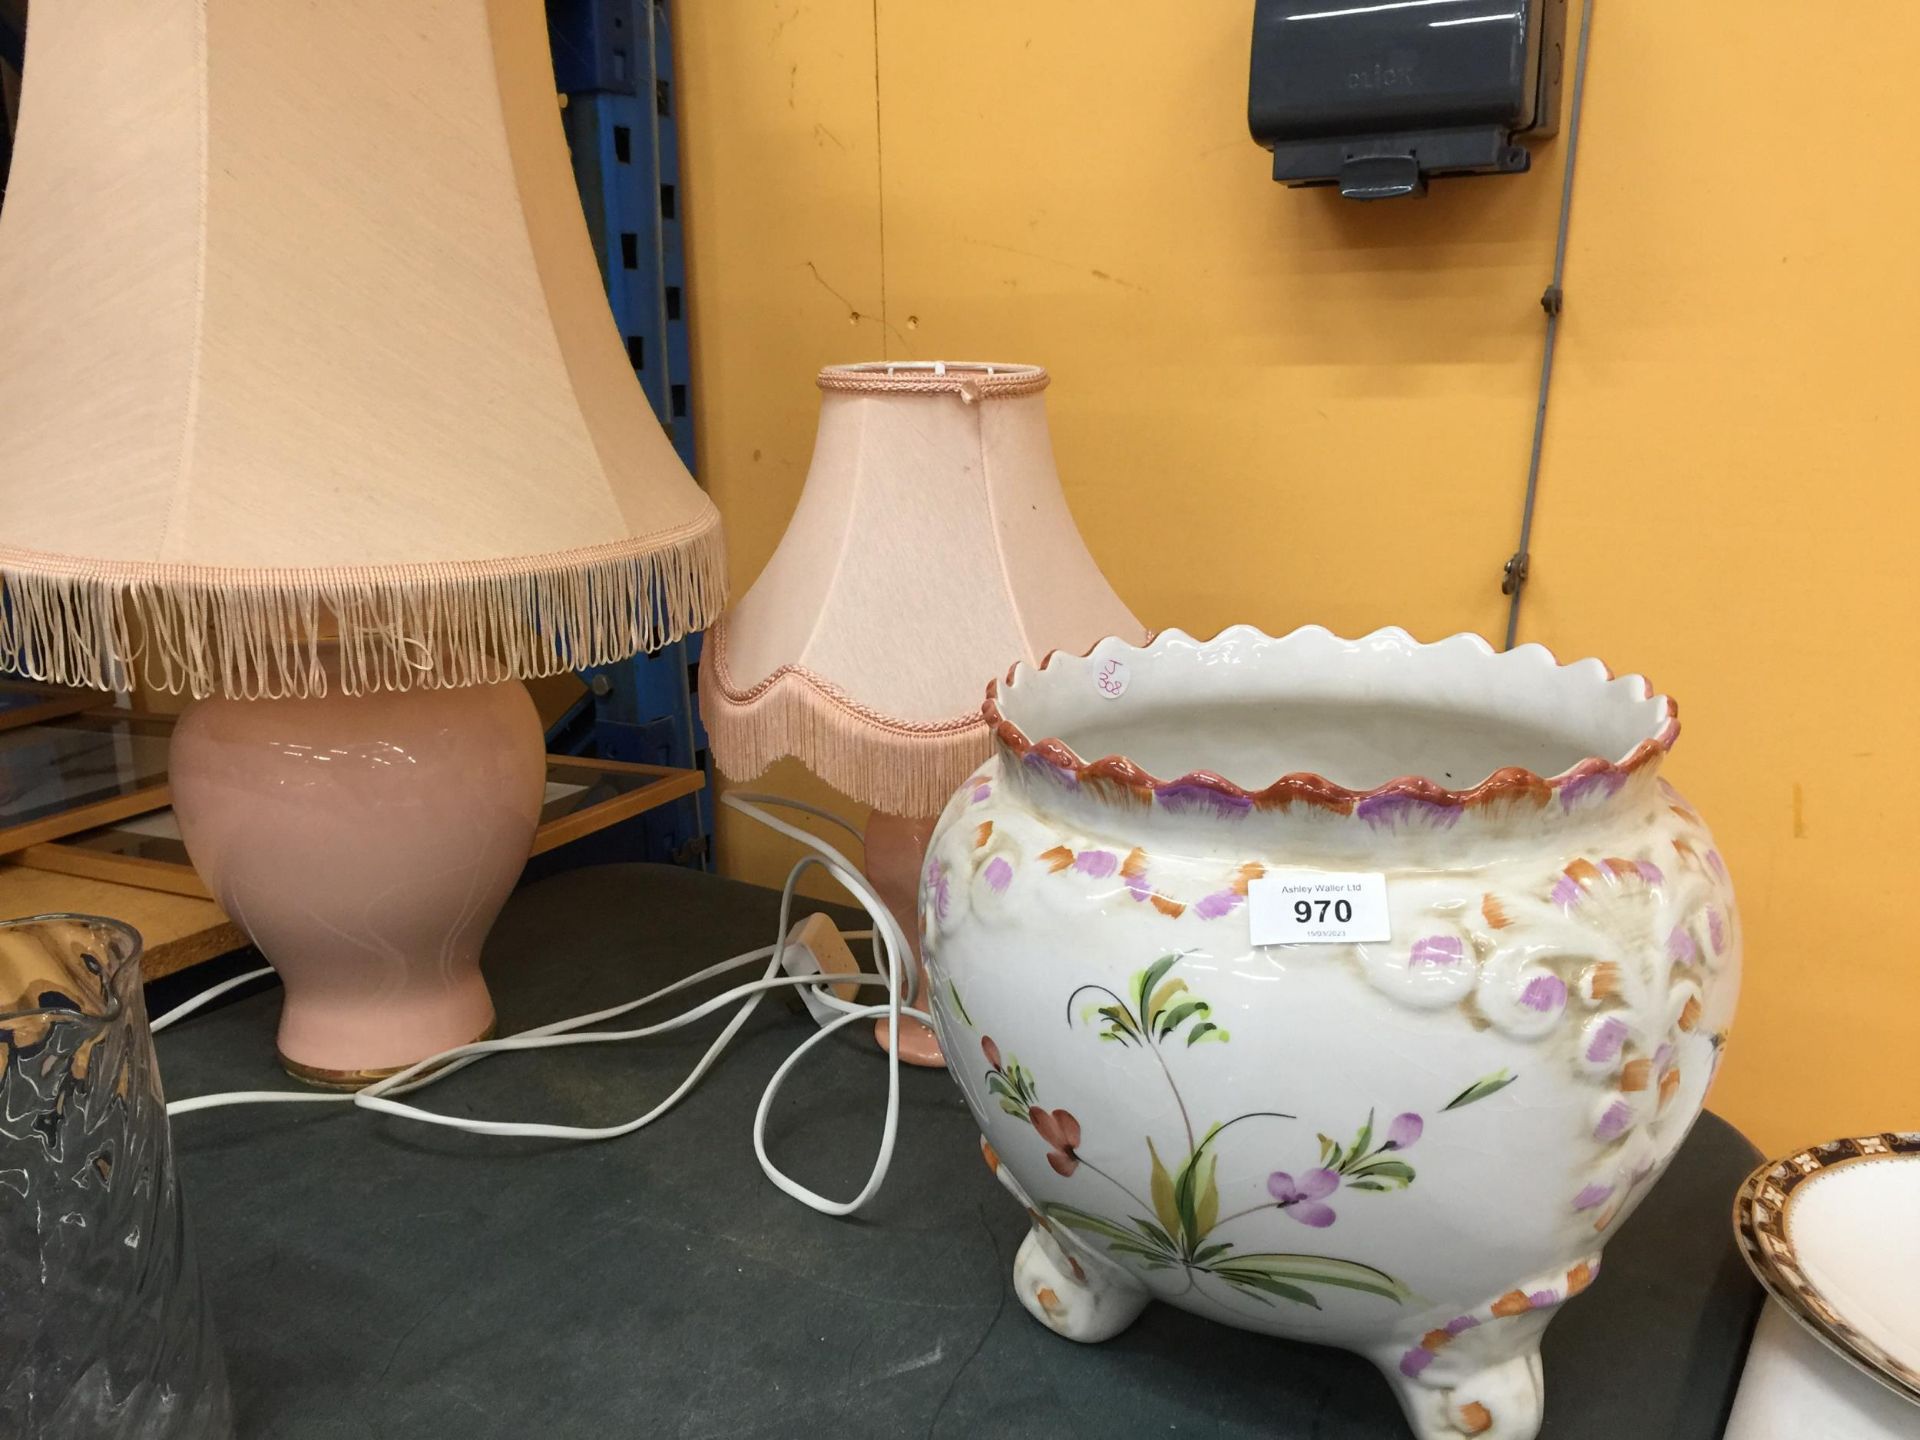 TWO PEACH COLOURED TABLE LAMPS WITH SHADES PLUS A LARGE FLORAL PLANTER